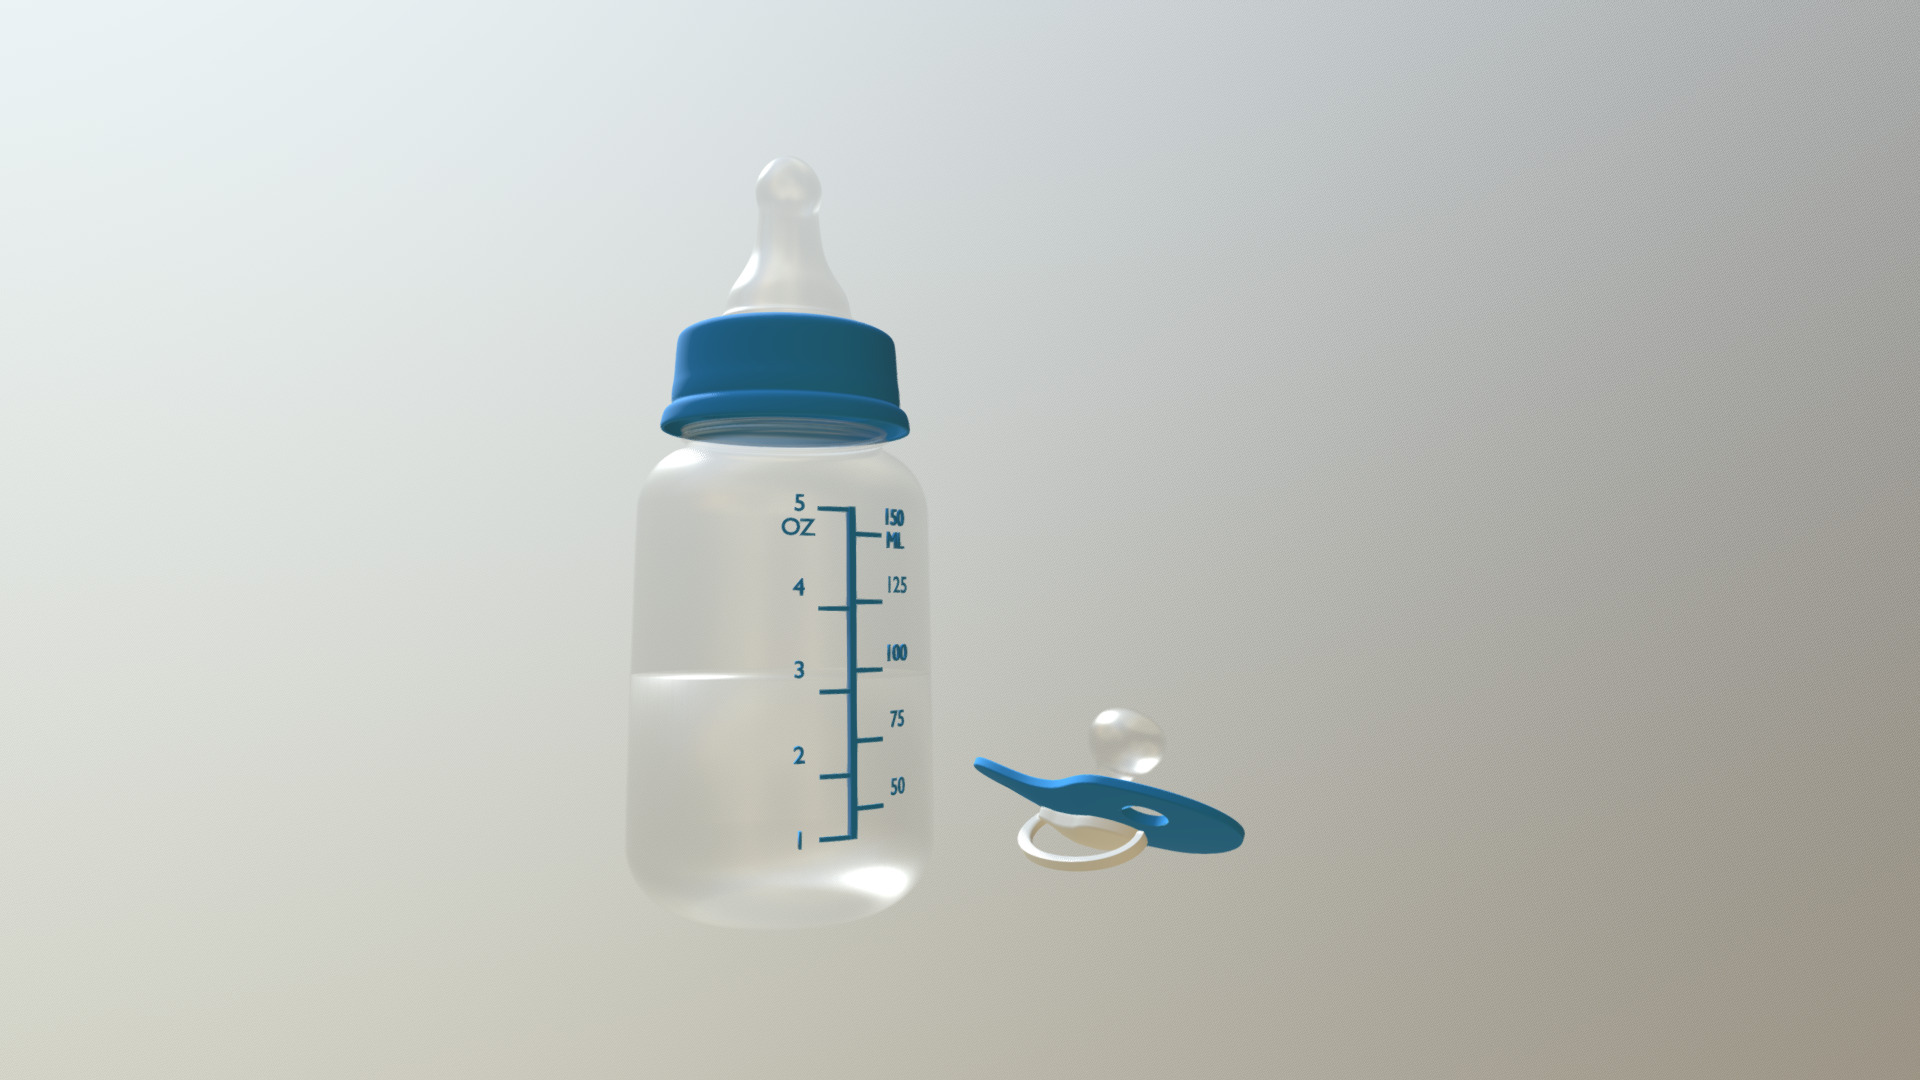 3D model Babies Bottle and Dummy - This is a 3D model of the Babies Bottle and Dummy. The 3D model is about a bottle of medicine.